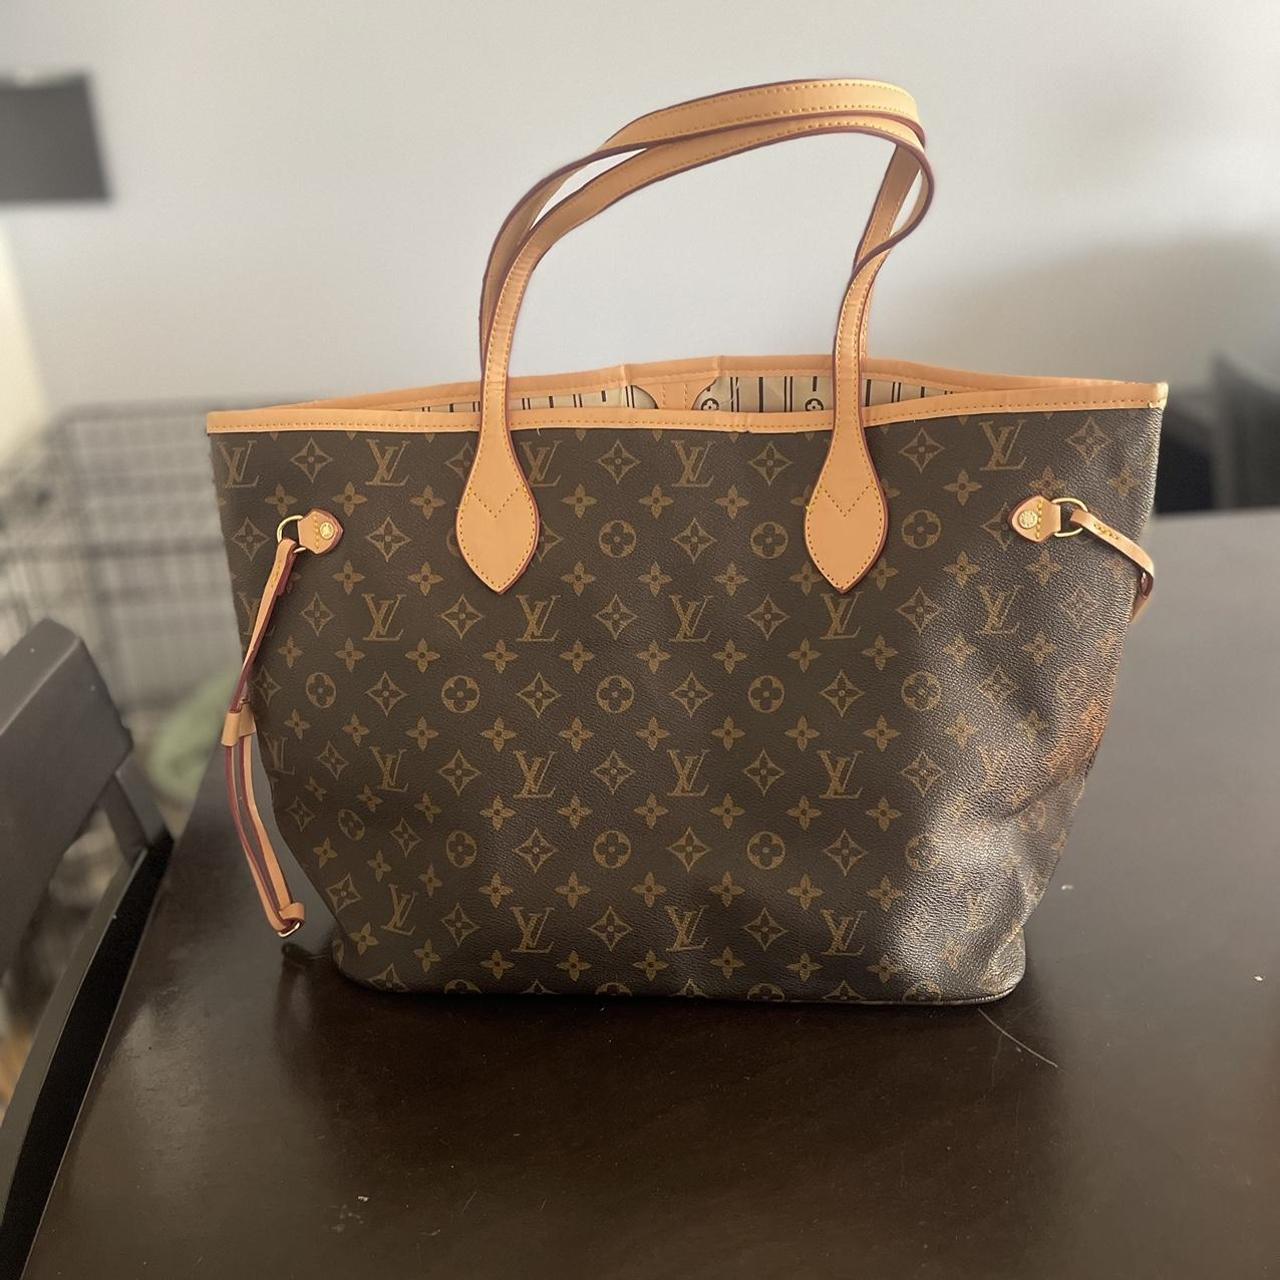 Louis Vuitton Neverfull MM for sale, some wear - Depop